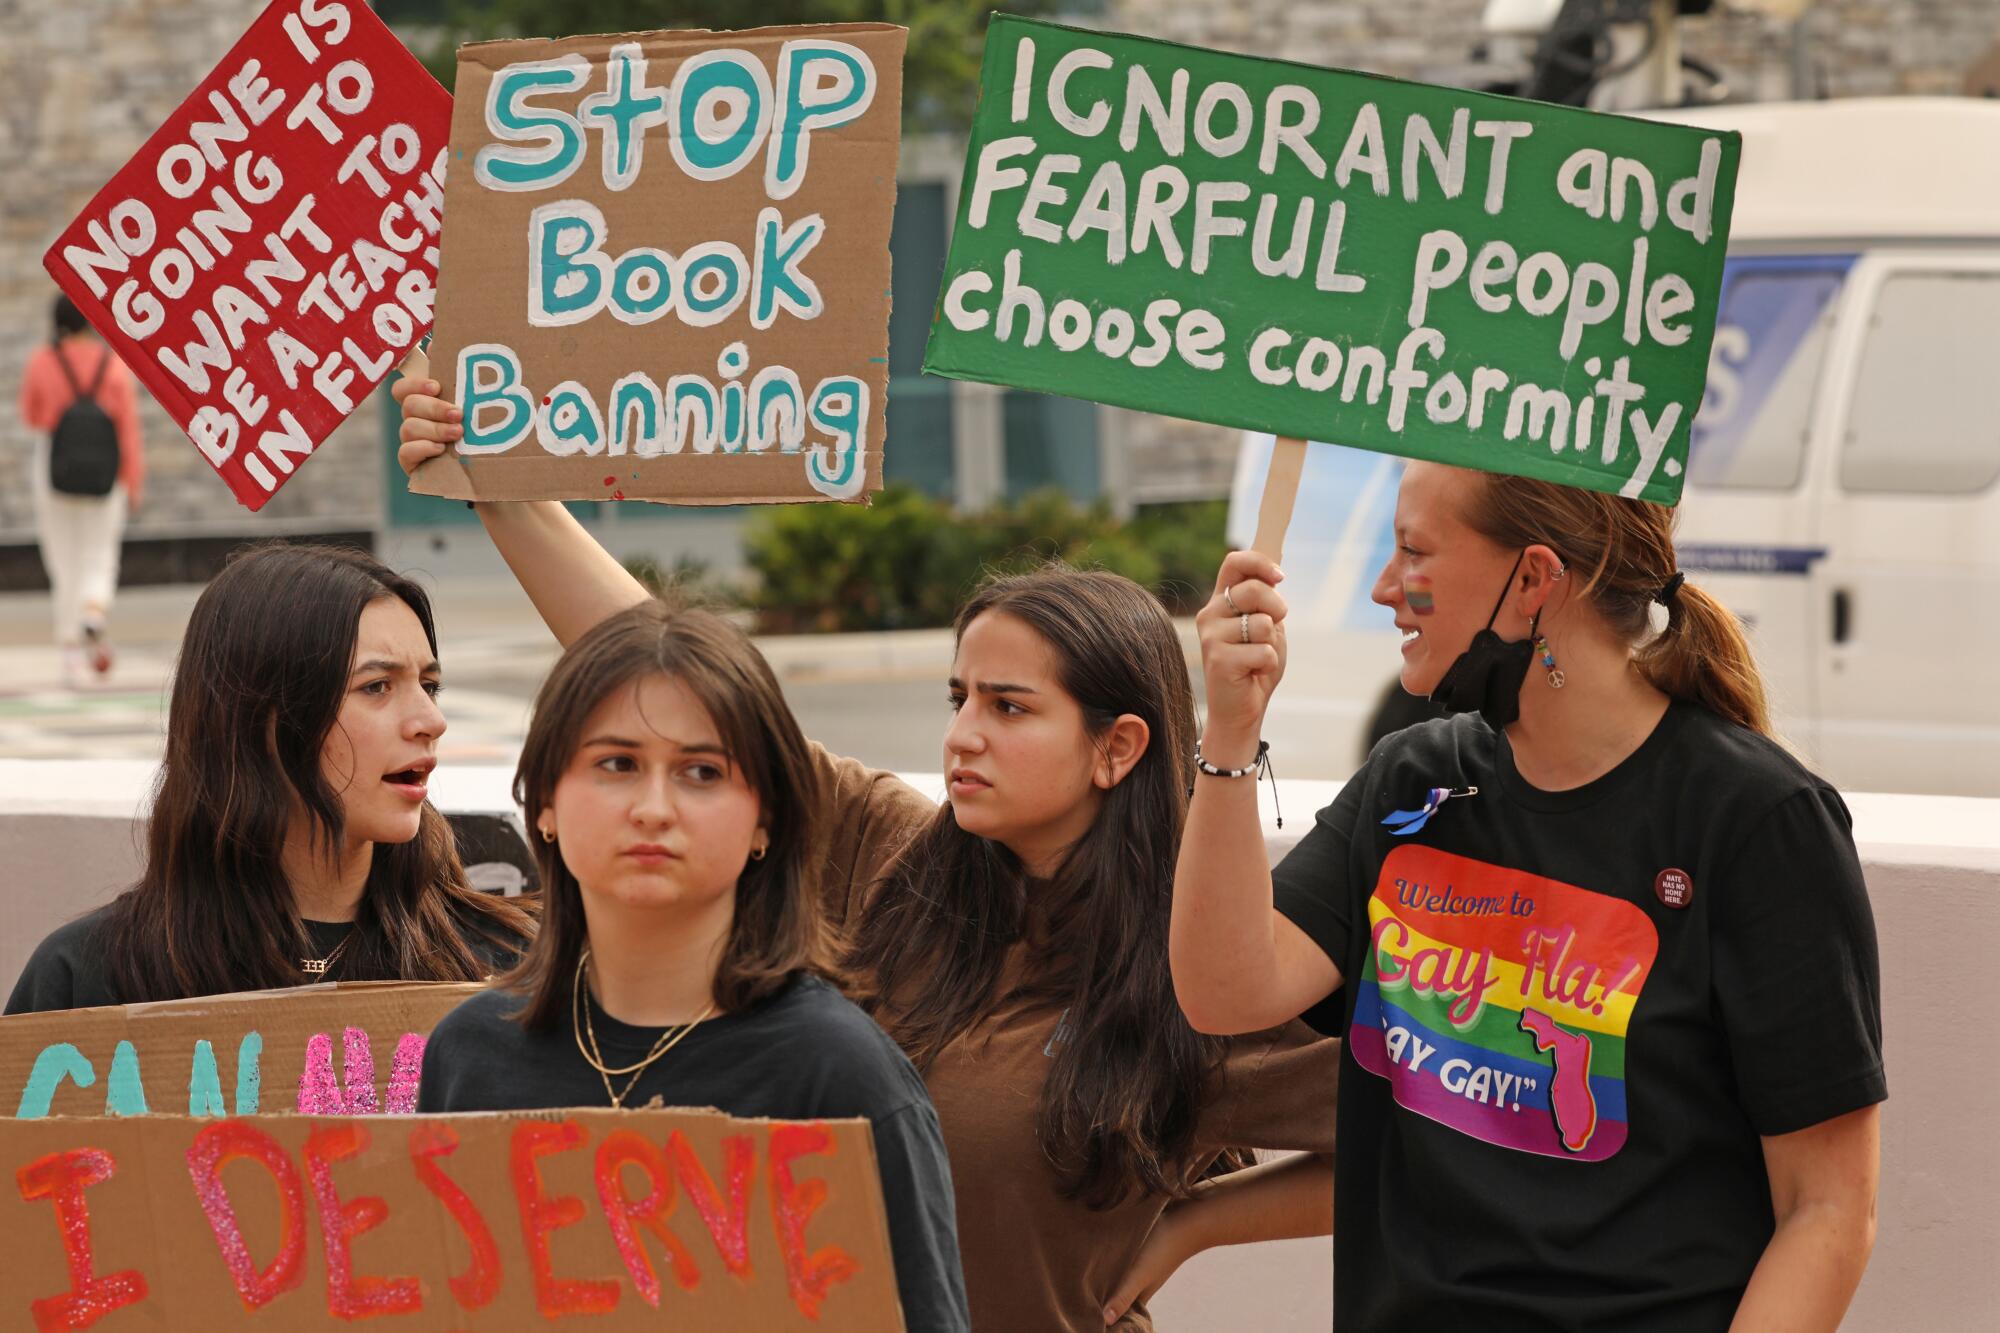 Four people holding signs against book banning